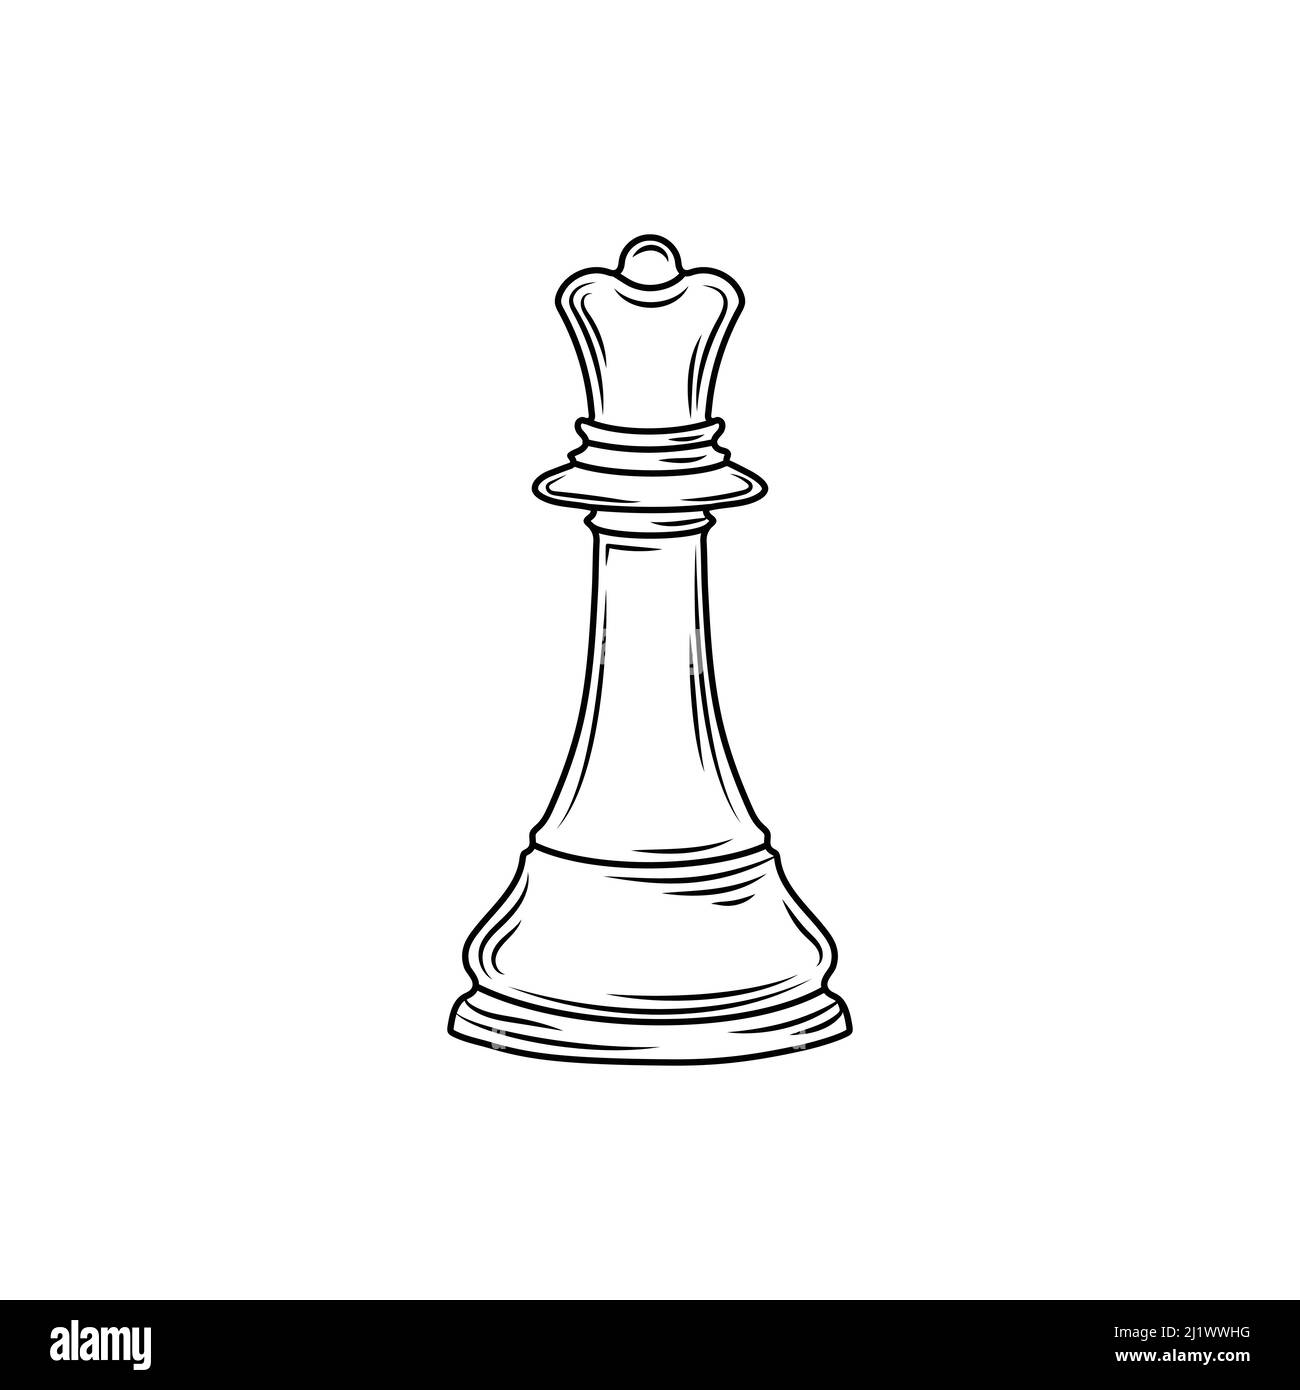 Hand-drawn Sketch Of Bishop Chess Piece. Chess Pieces. Chess